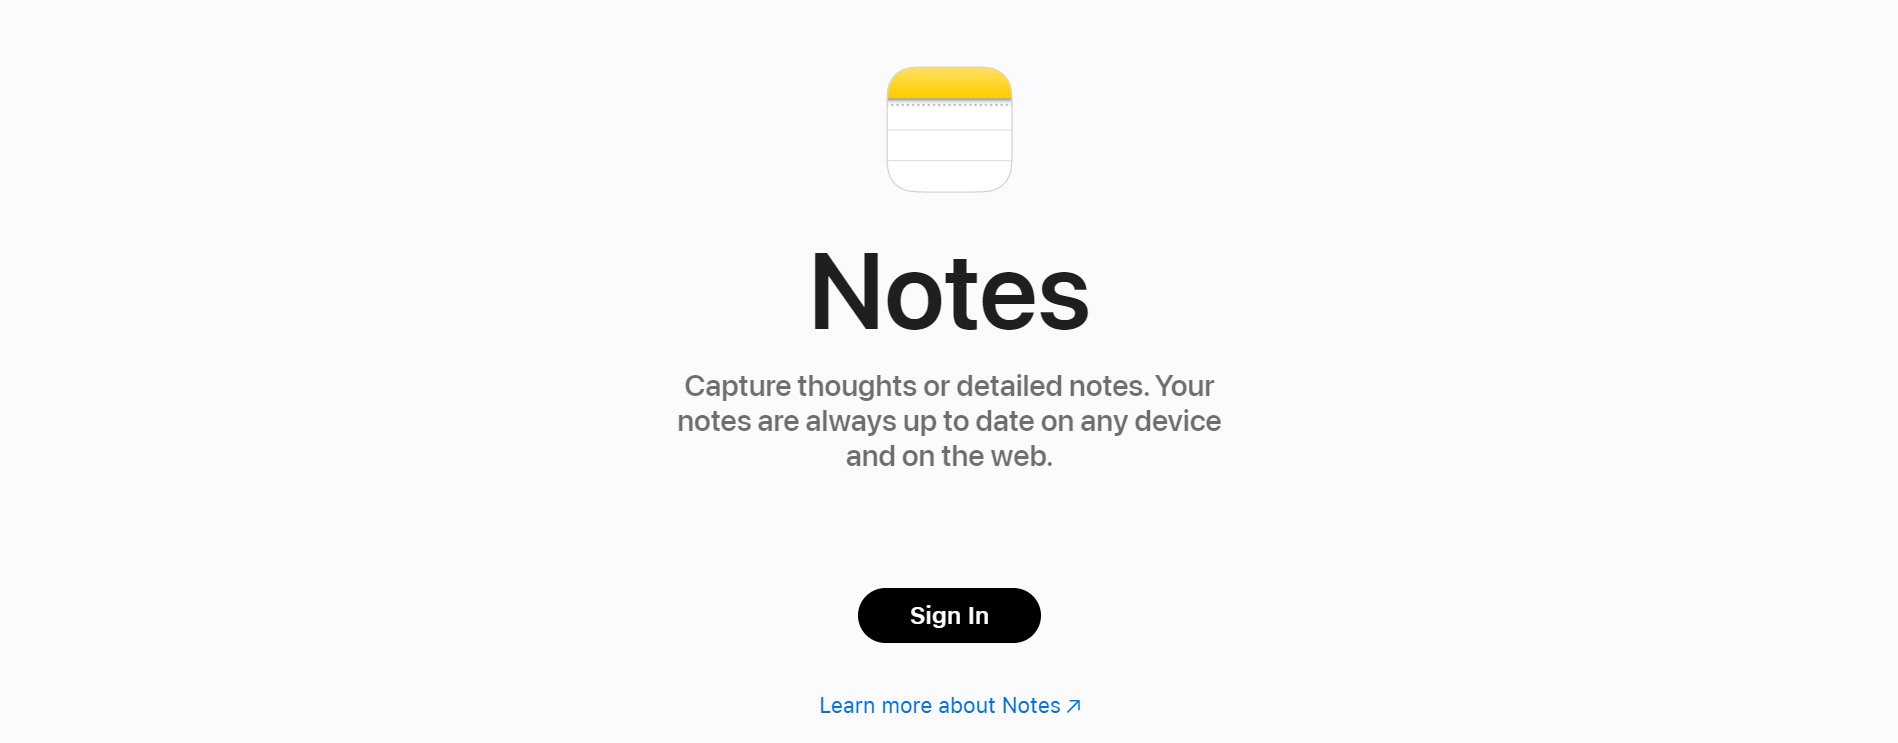 Apple Notes homepage inviting users to sign in to capture thoughts or detailed notes, ensuring synchronization across all devices and web.